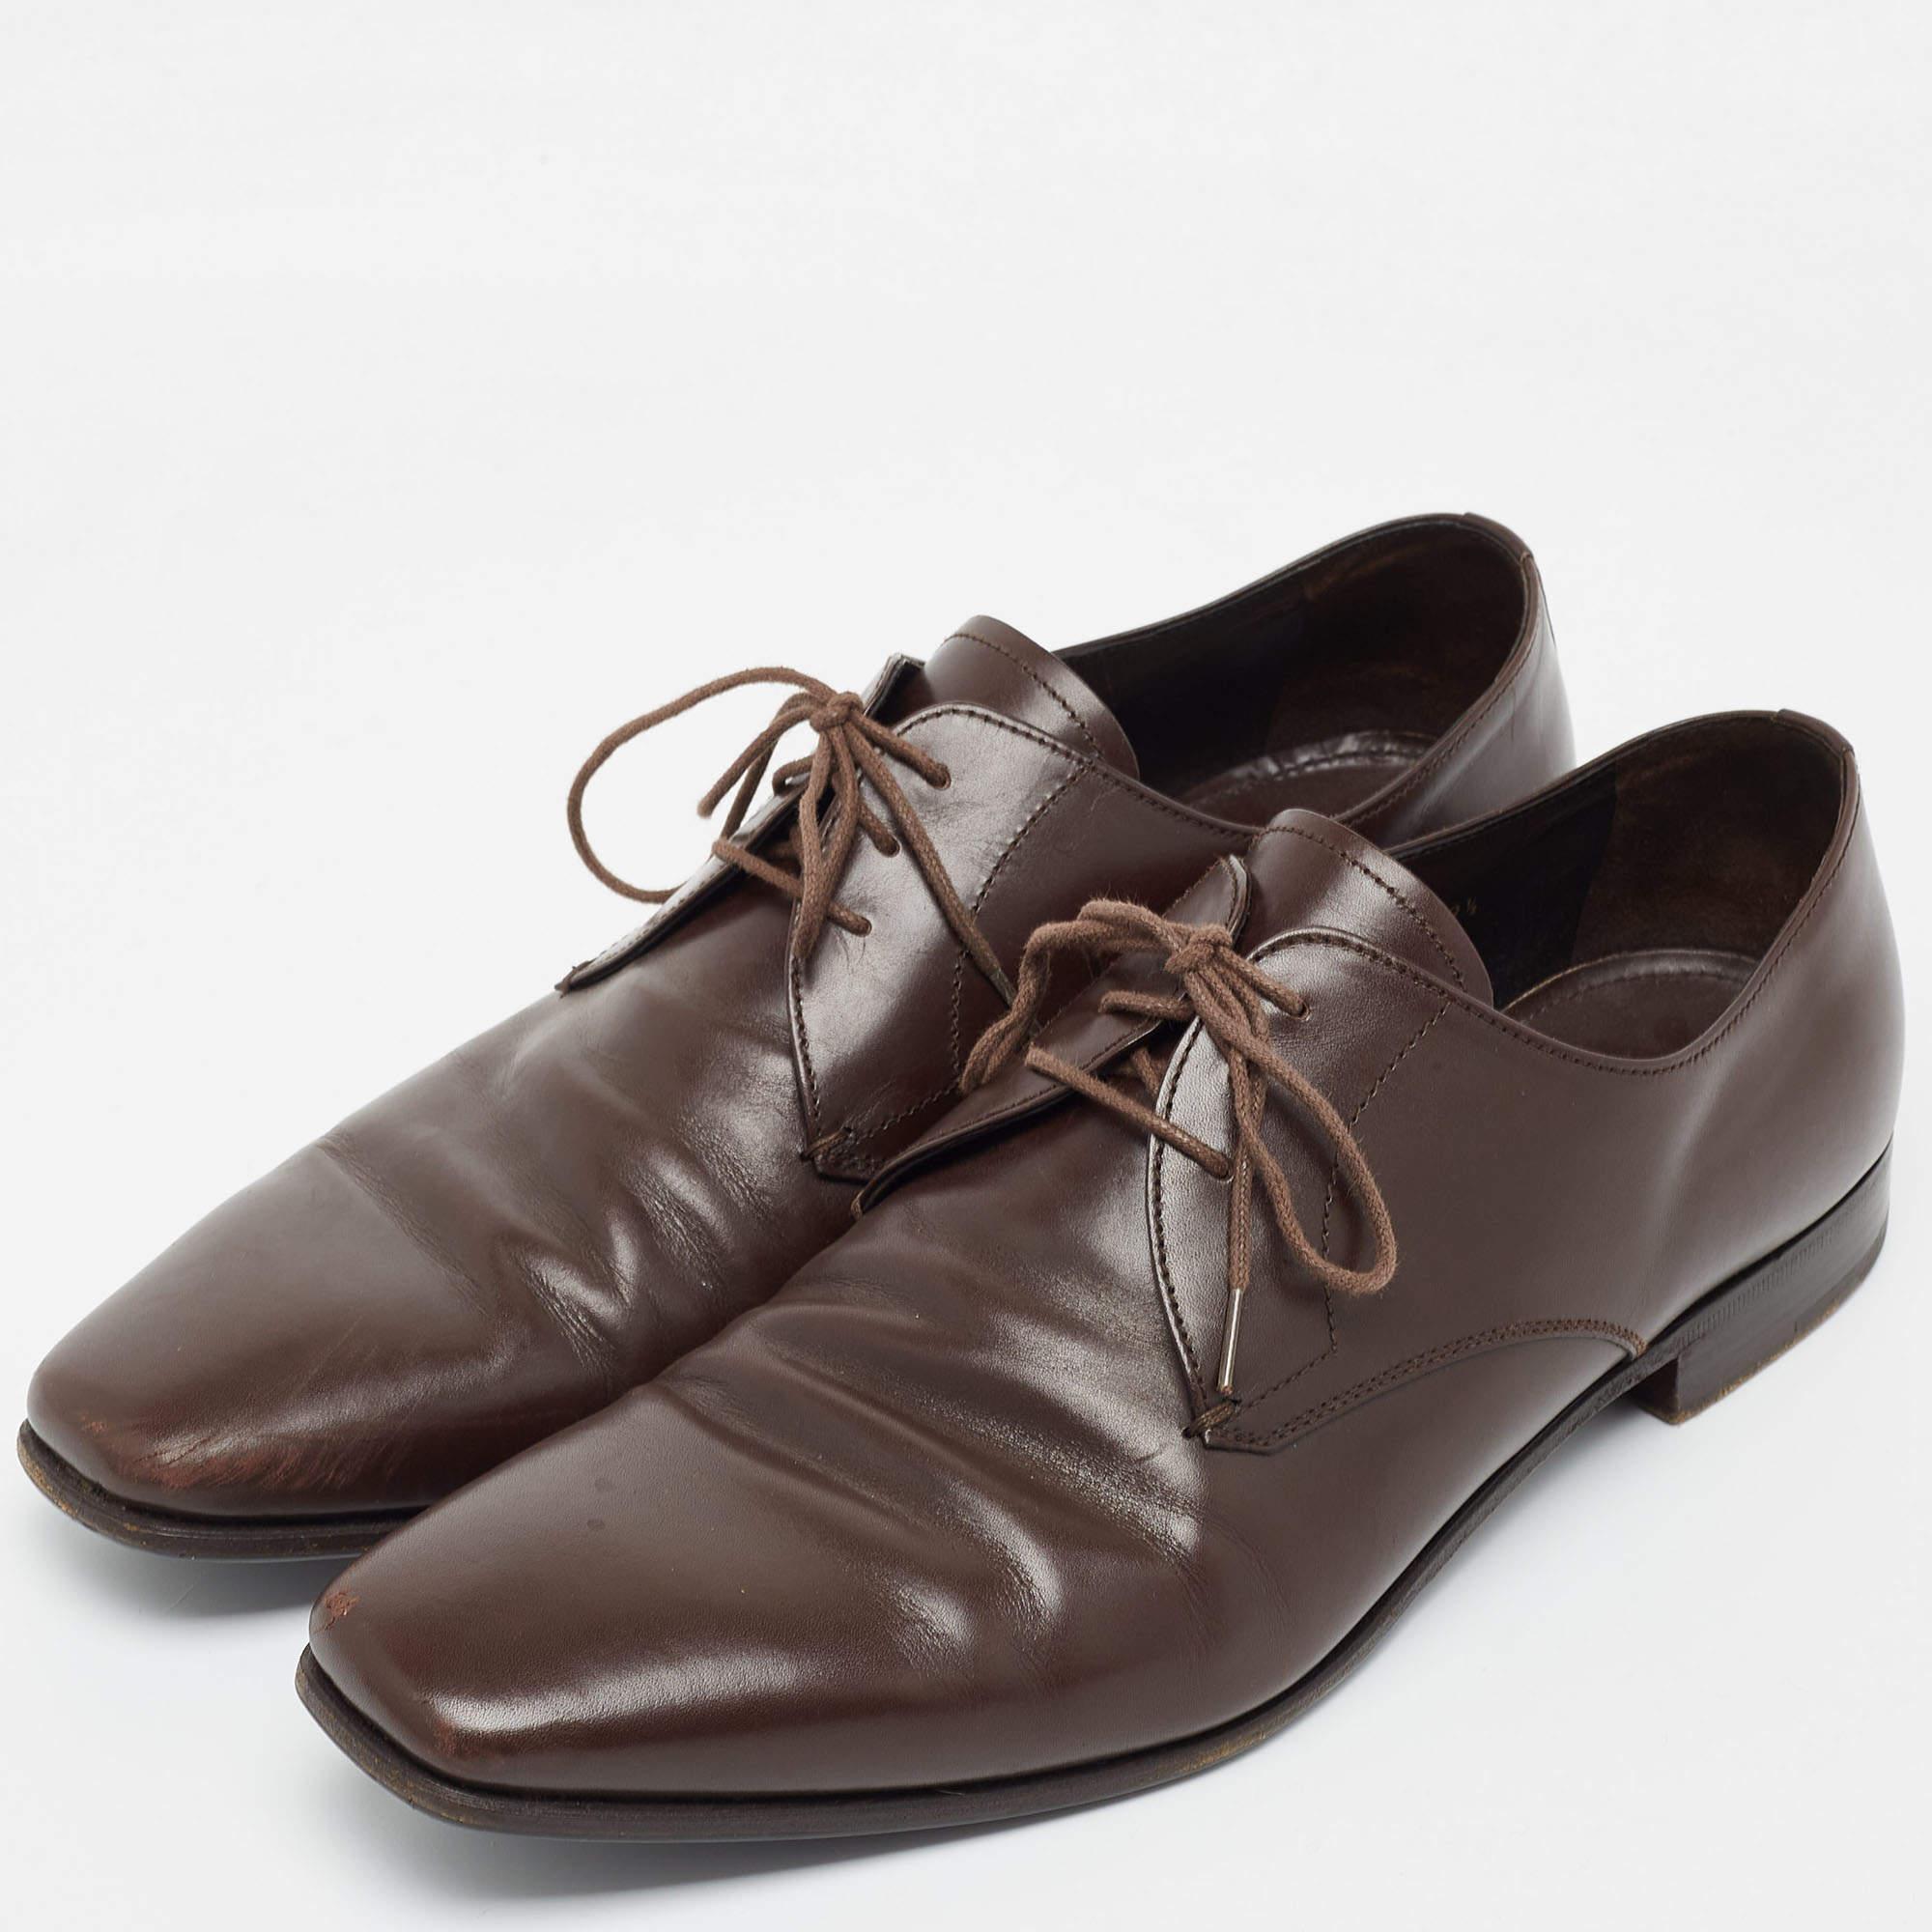 These oxfords are designed from the finest material featuring an elegant look, sturdy soles, and lace-ups on the vamps. Team these shoes with tailored pants and a blazer for a smart formal look.

